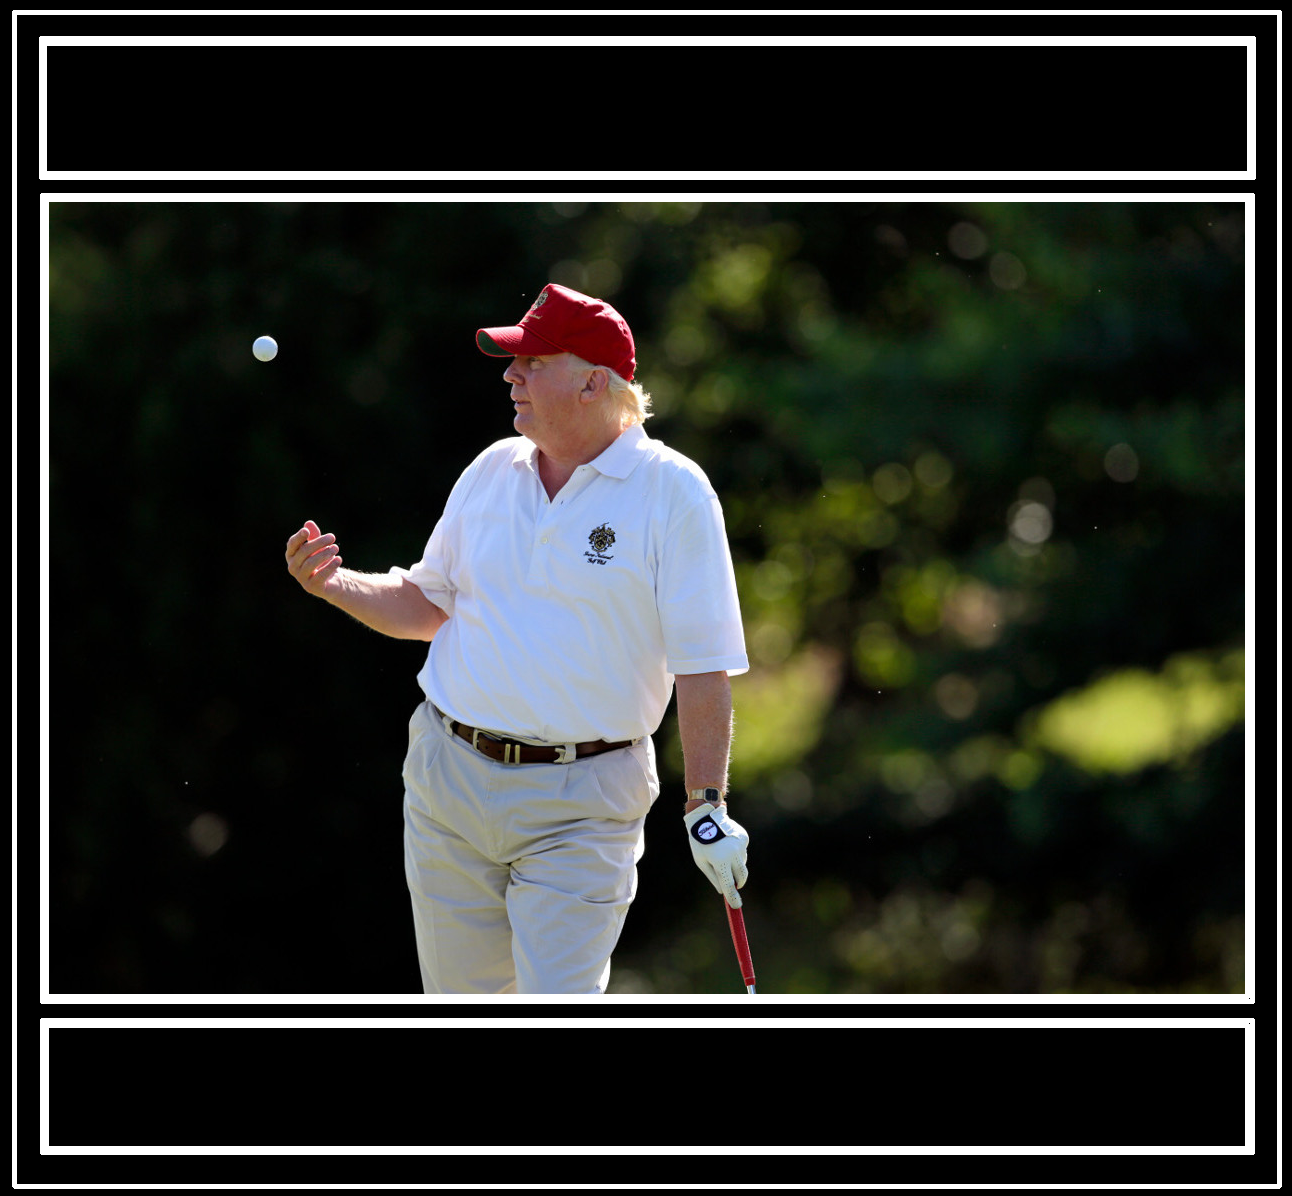 No "President DonaldTrump tossing golf ball" memes have been feat...